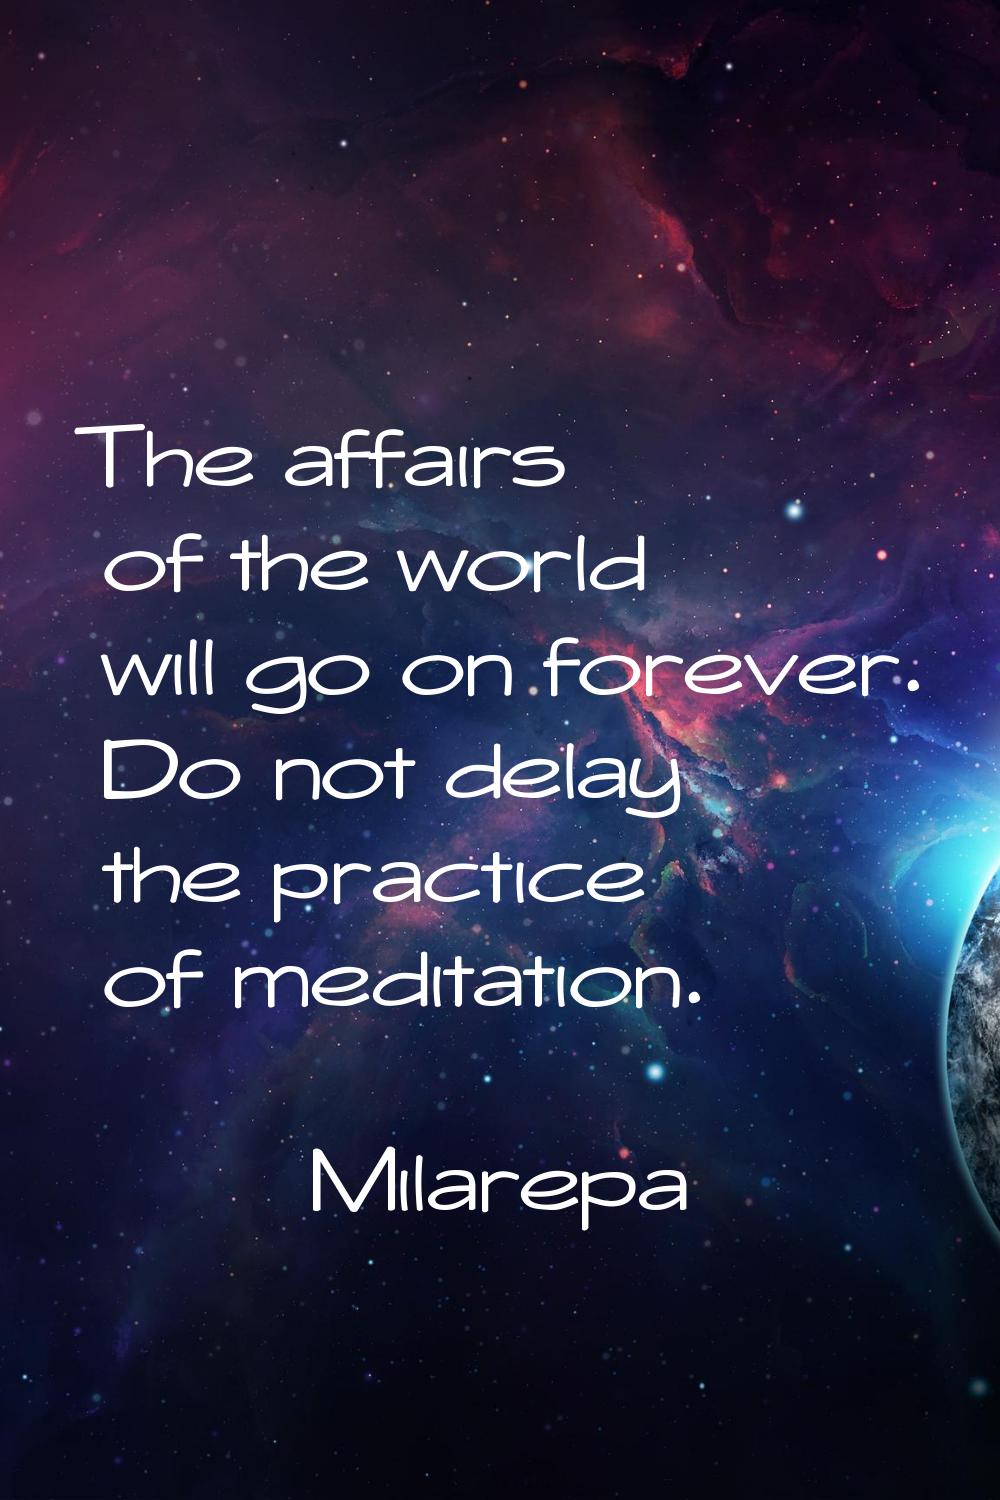 The affairs of the world will go on forever. Do not delay the practice of meditation.